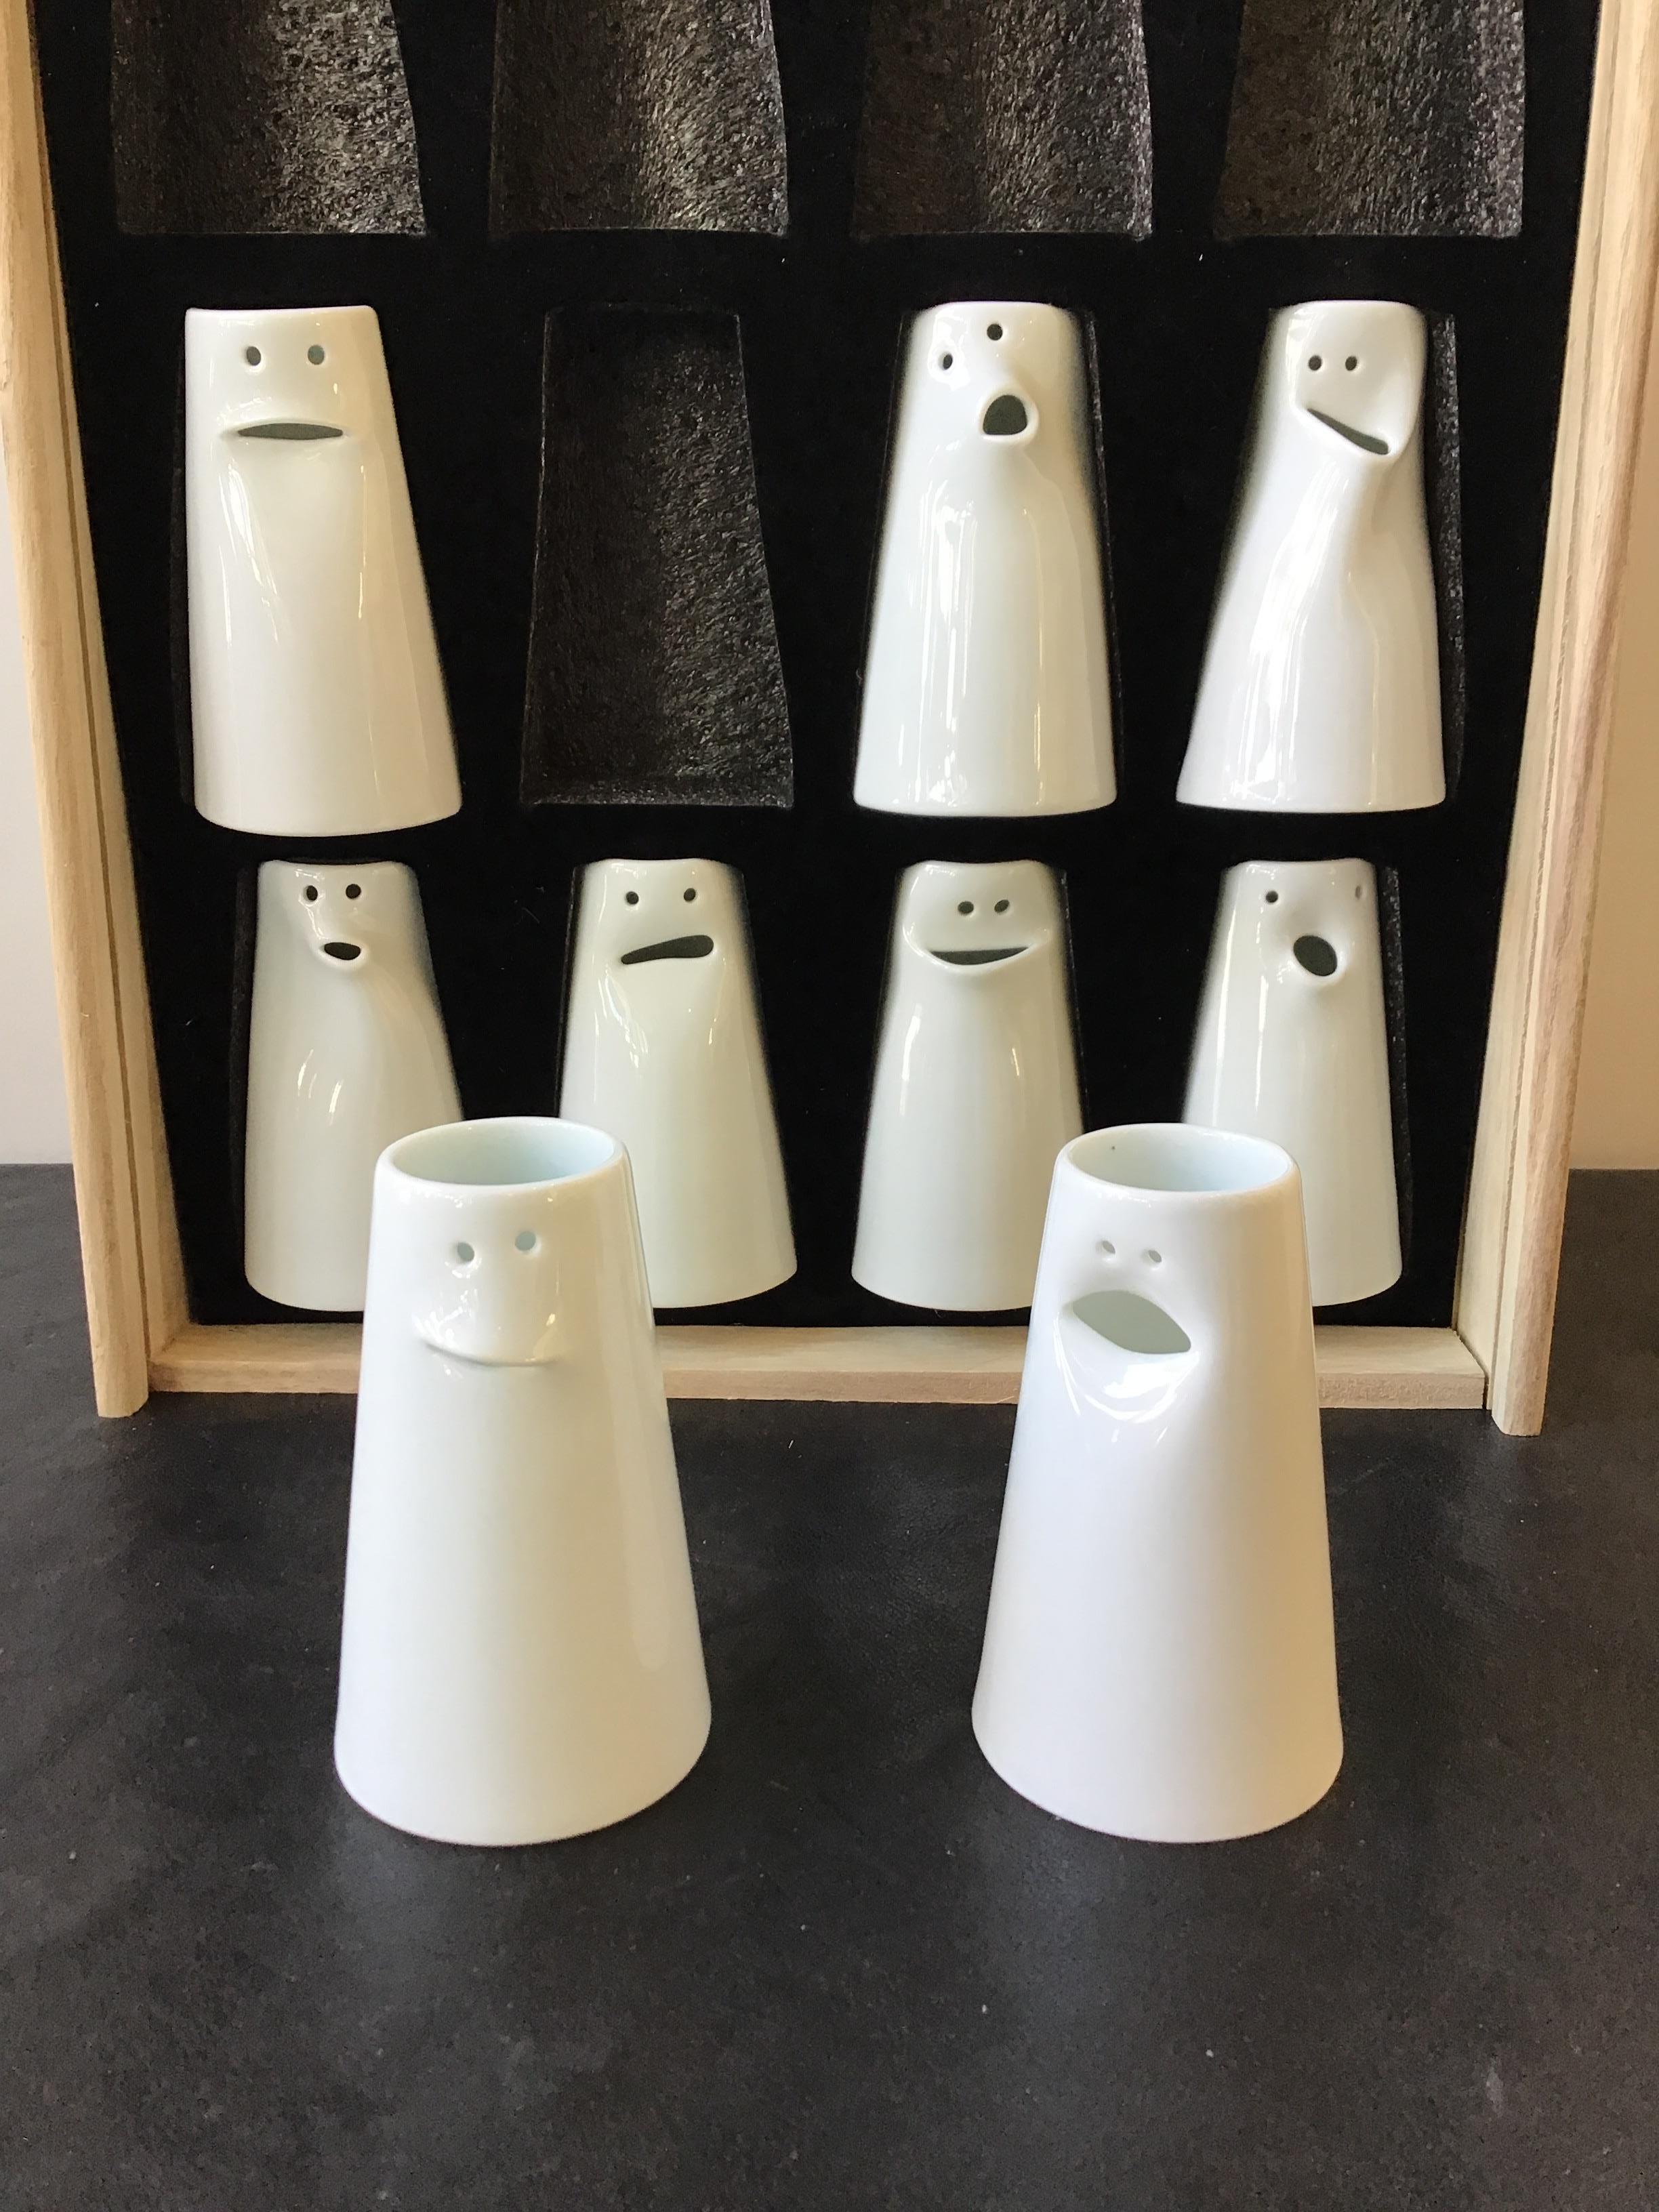 Unique expressive fine porcelain face bud vases, designed by Tong Wei. Made by Jingdezhen for Spin Ceramics. Some can be used as a creamer. Each face different, set of 9.